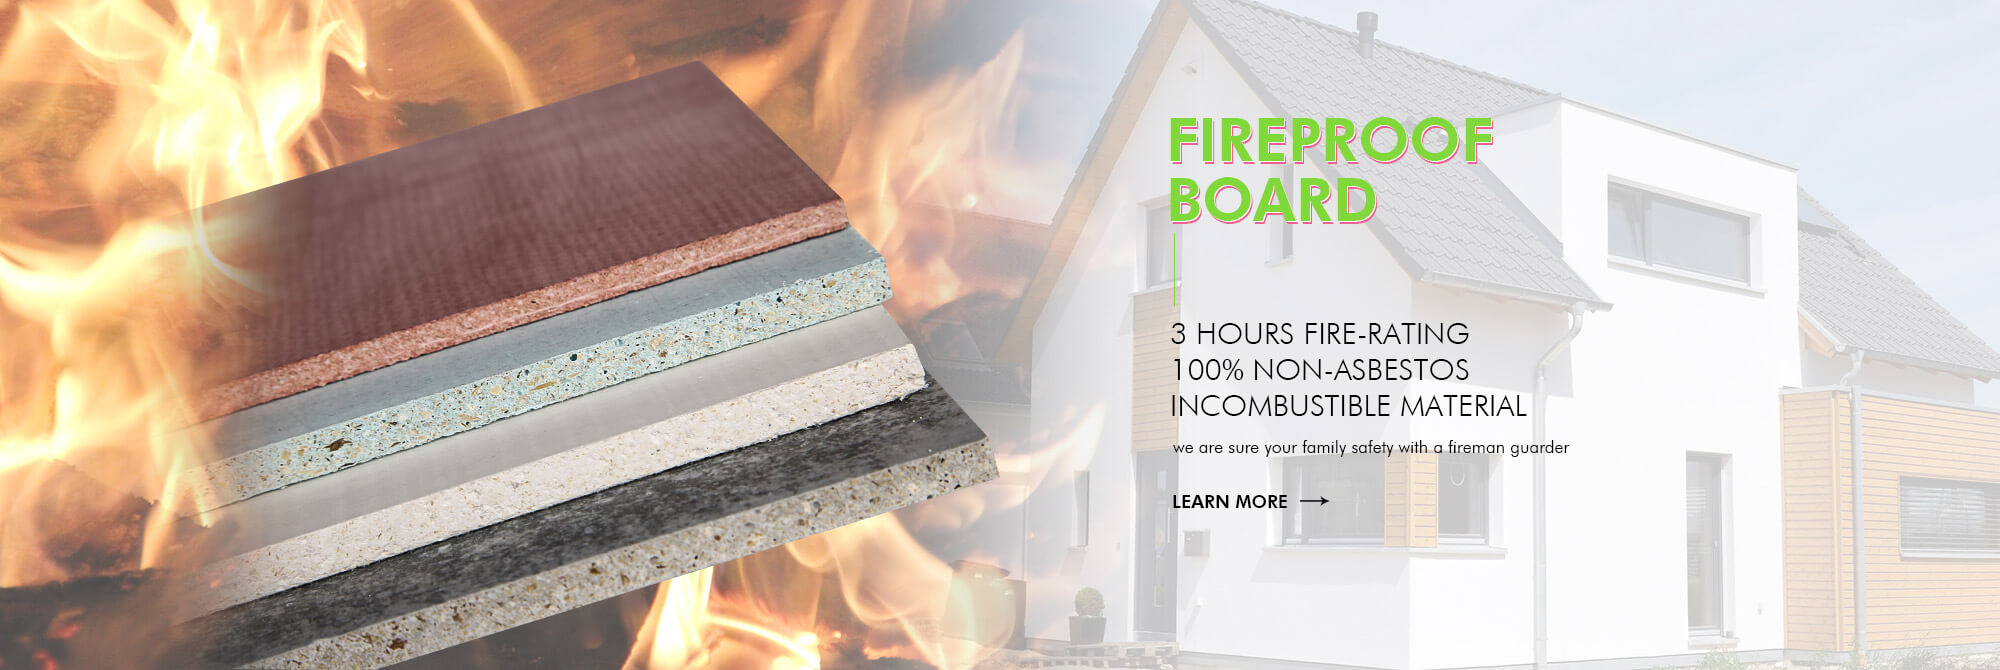 Fireproof board recommend